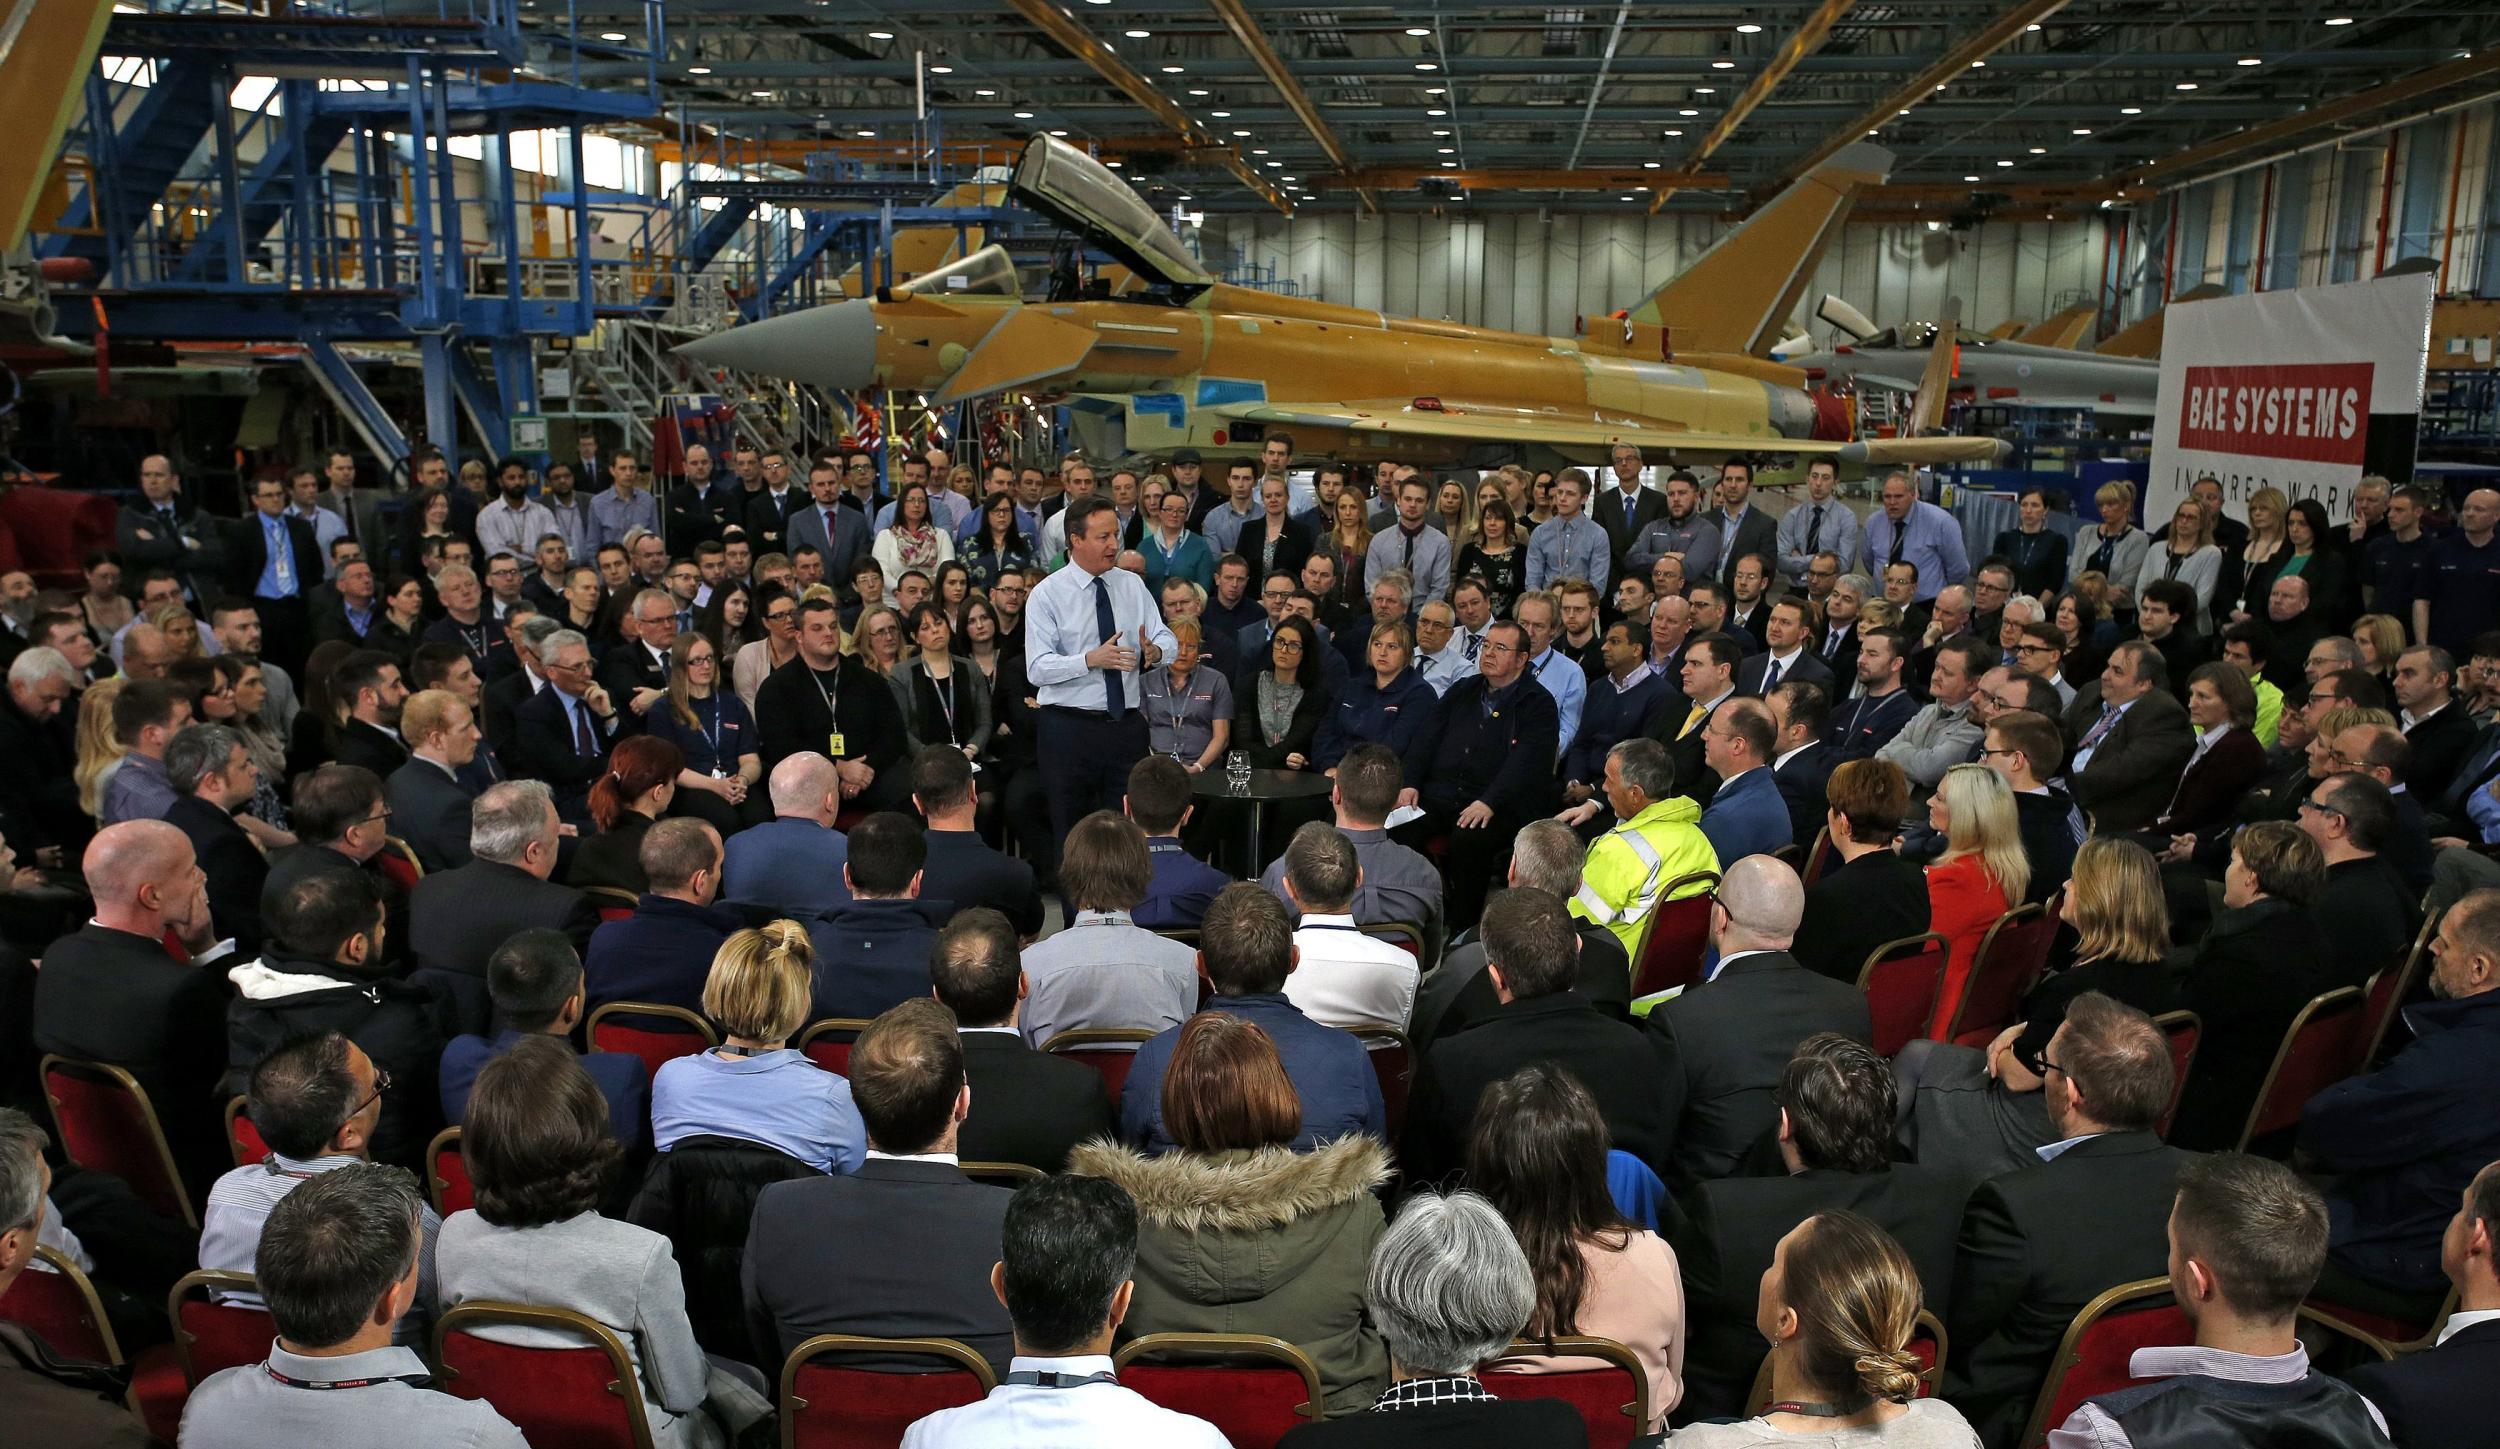 Prime Minister David Cameron speaking in front a Eurofighter Typhoon to BAE Systems employees